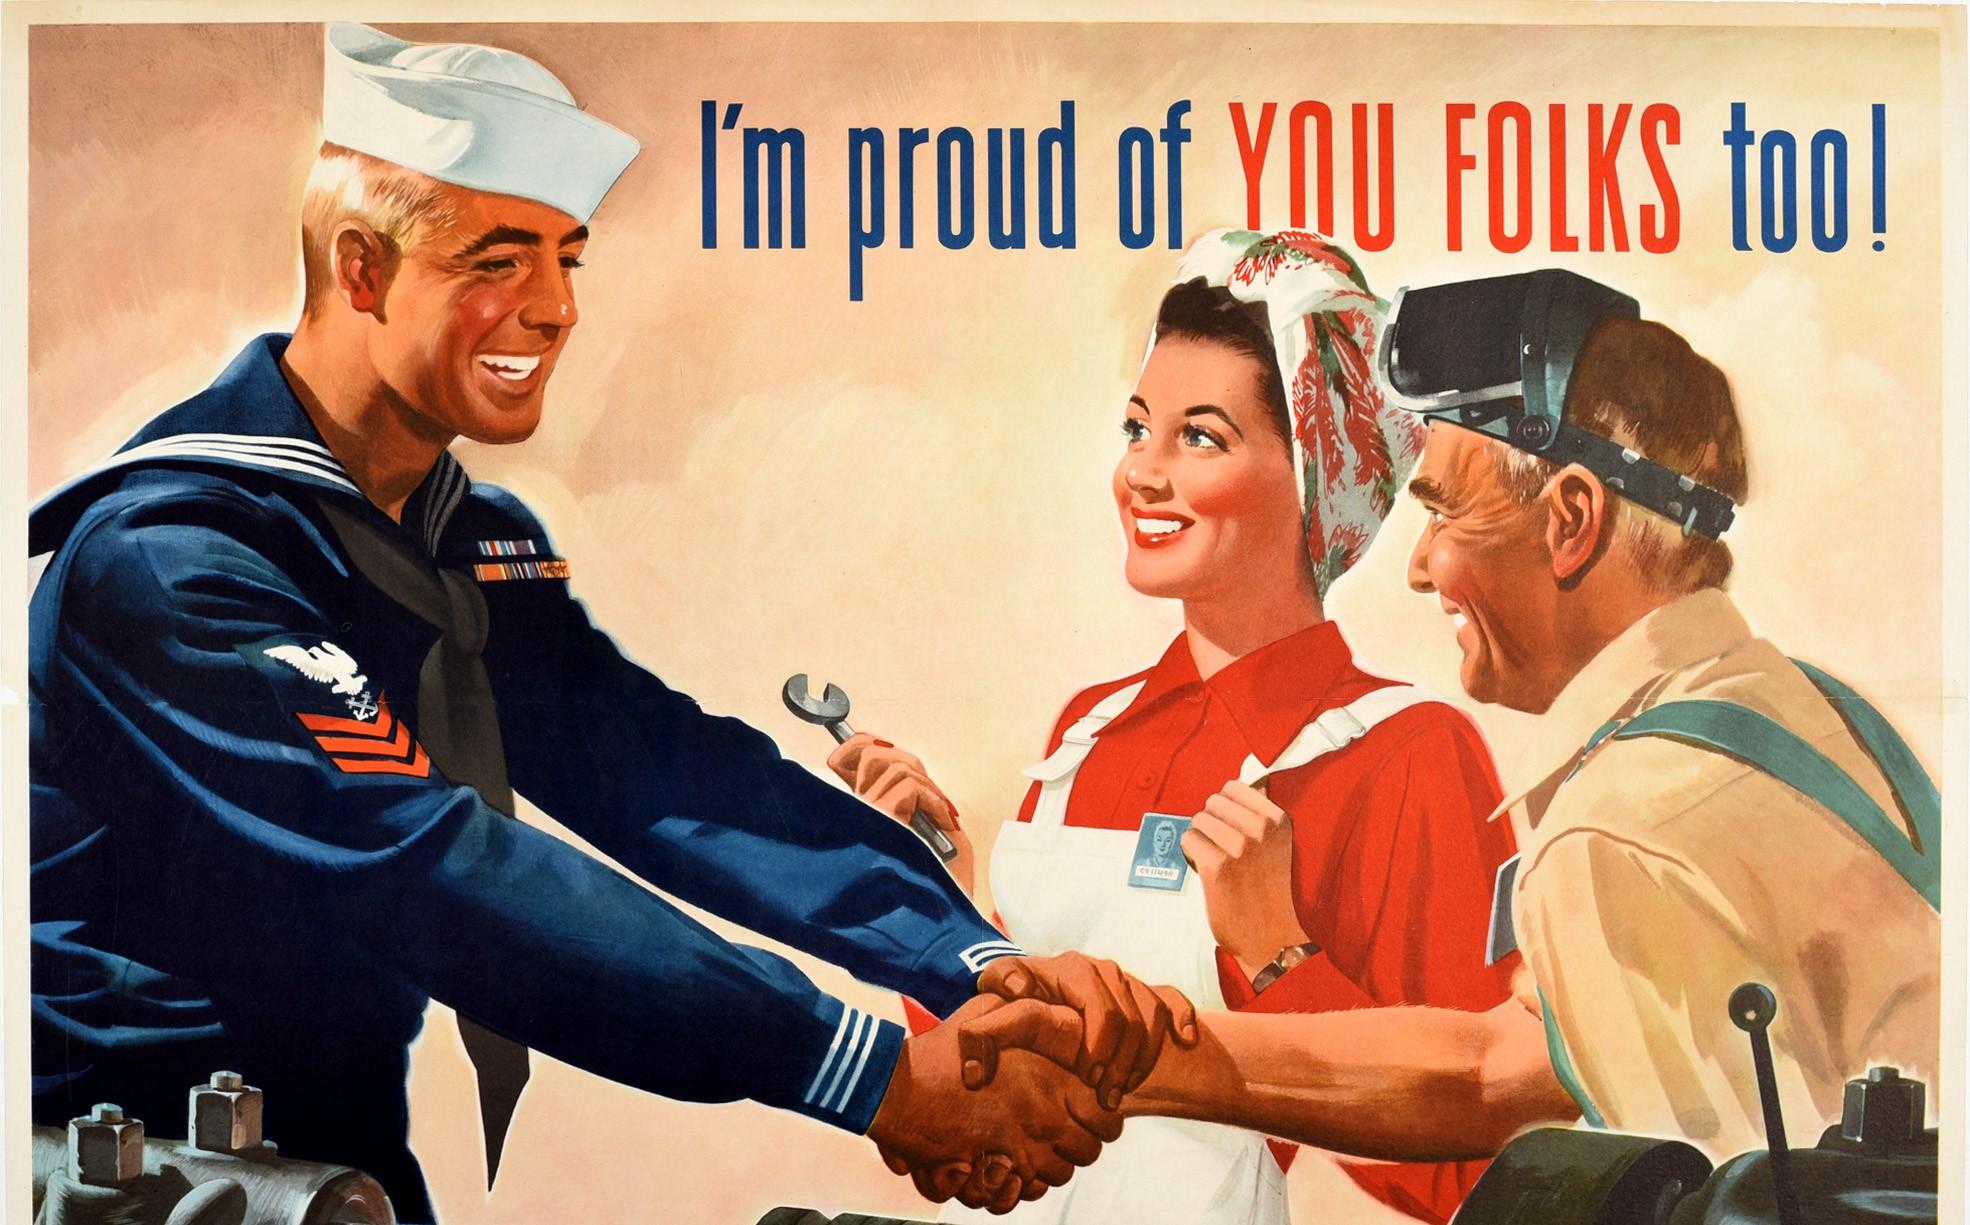 Original vintage World War Two propaganda poster - I'm Proud of You Folks Too! - encouraging people at home to join in the war effort featuring a smiling young sailor in US Navy uniform shaking hands with an older man working as an industrial welder